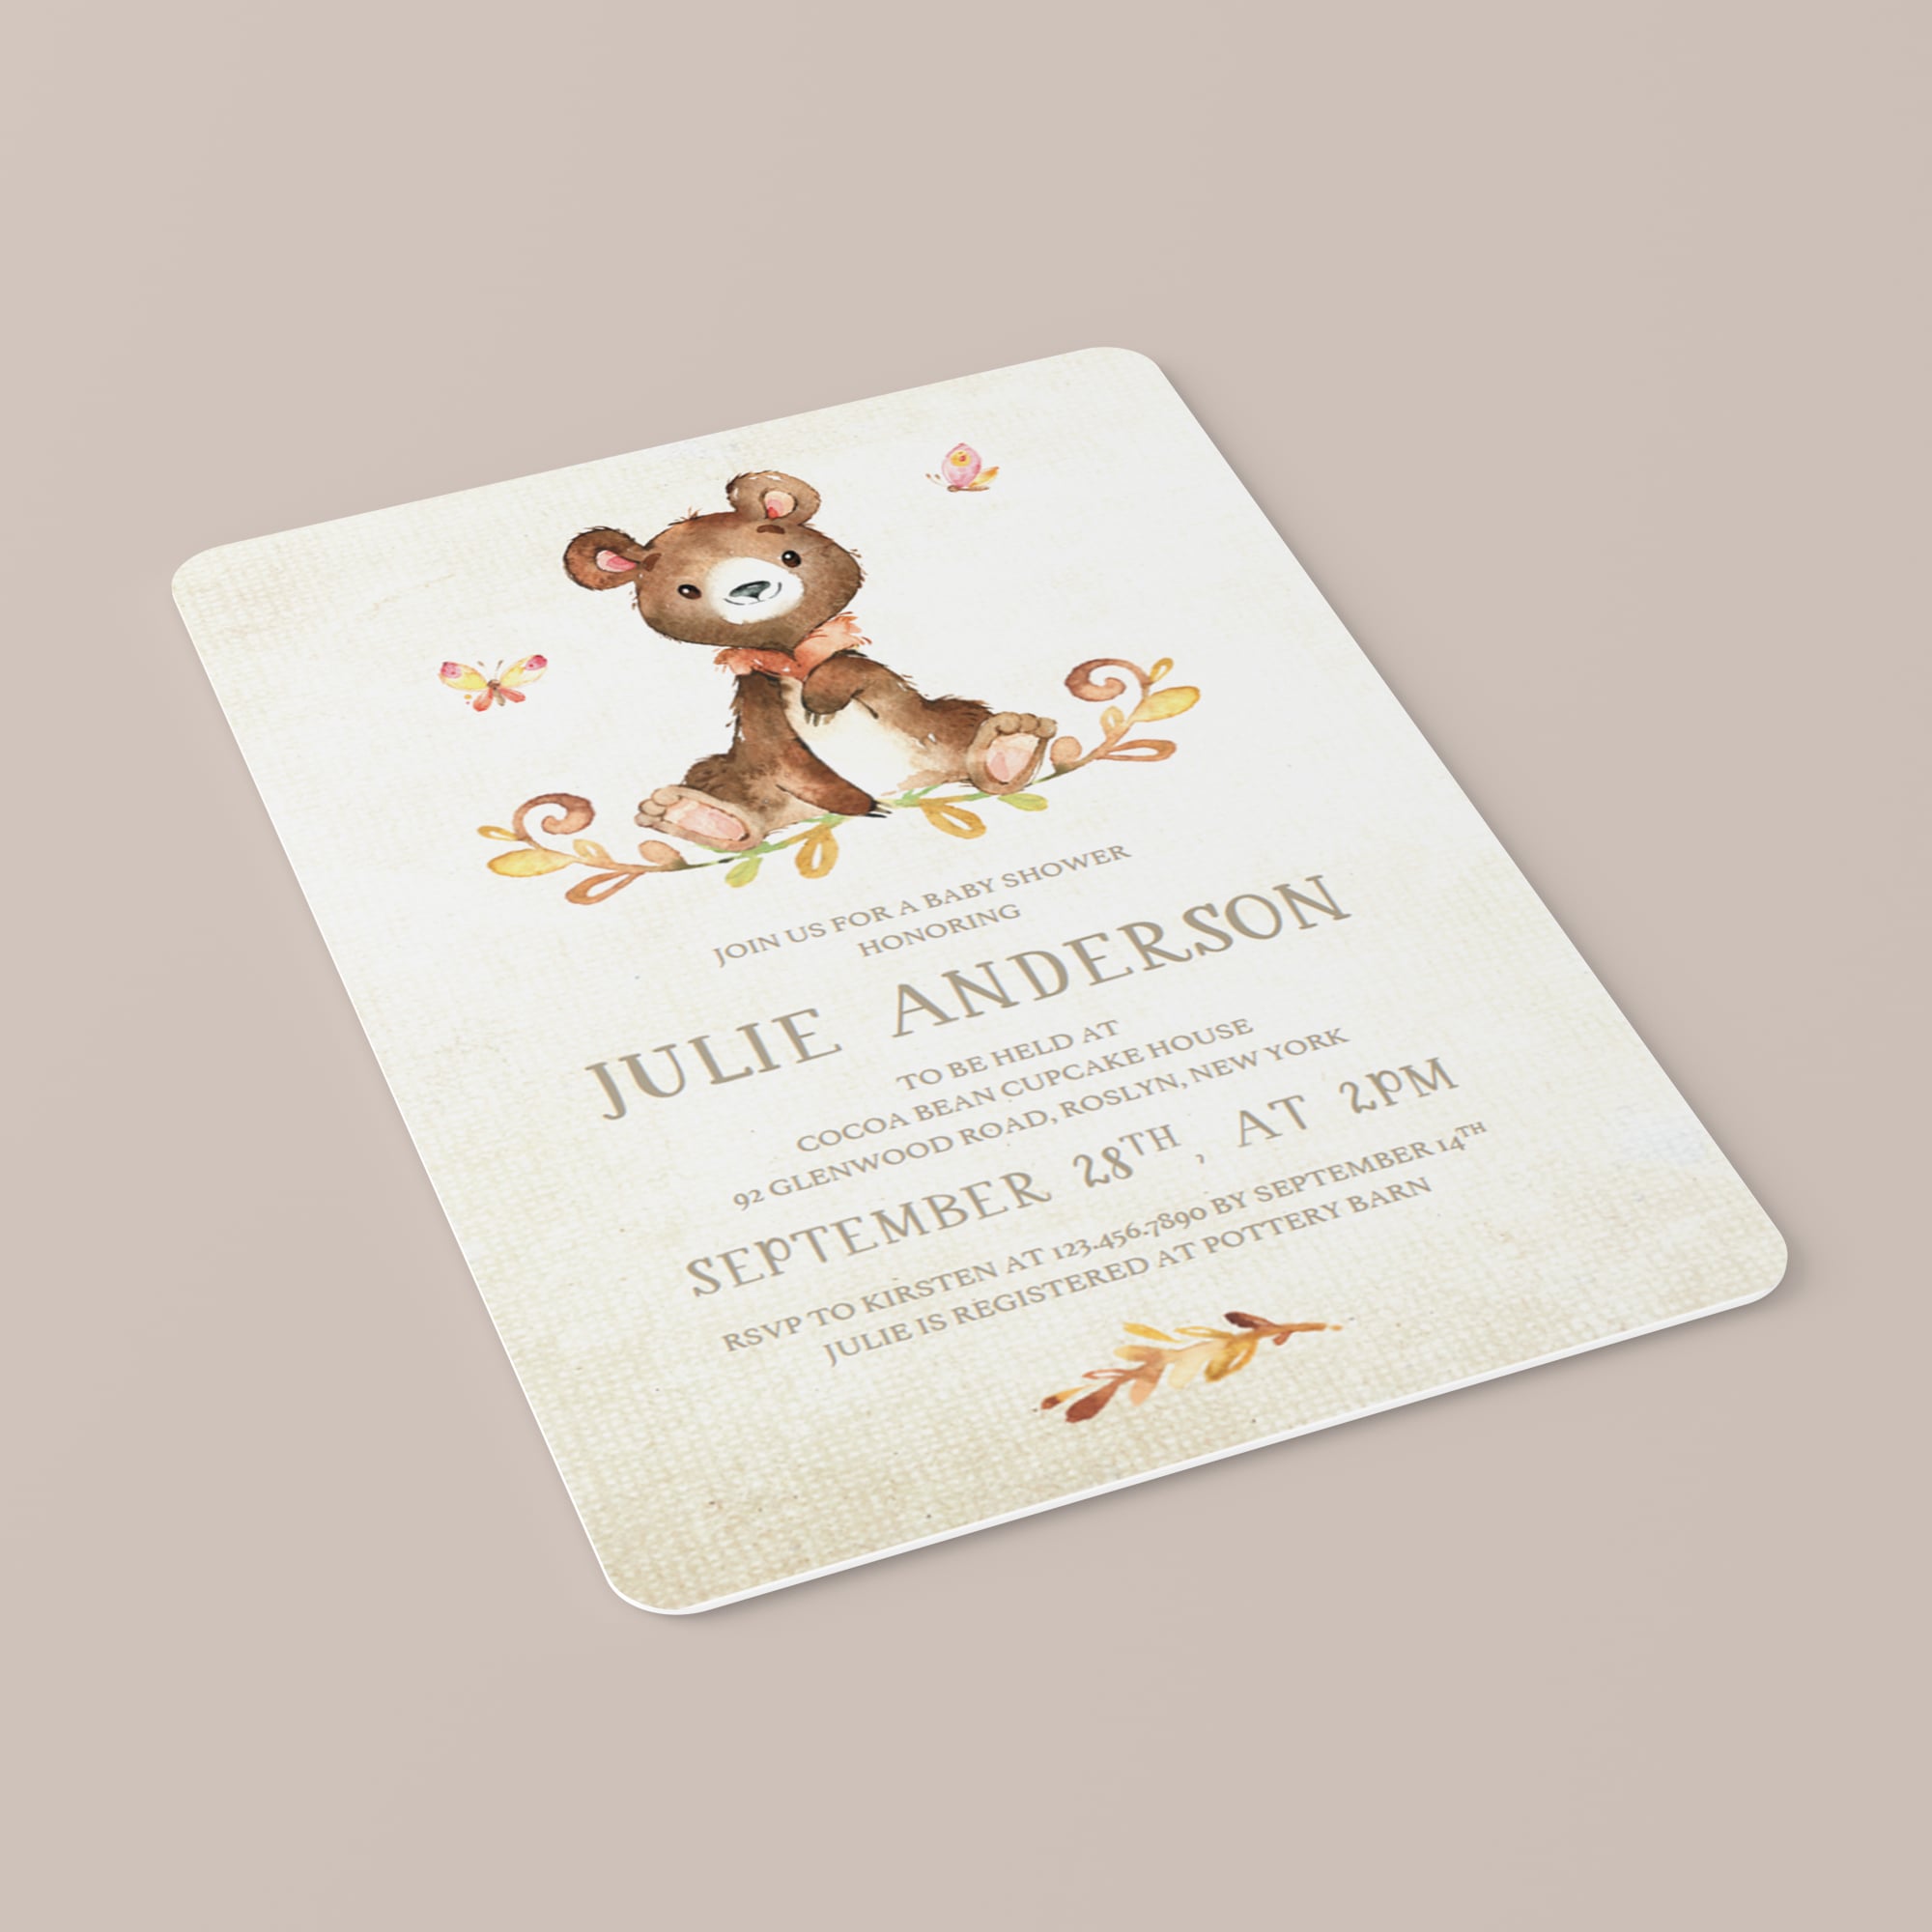 Personalized baby party invite with watercolor teddy bear by LittleSizzle